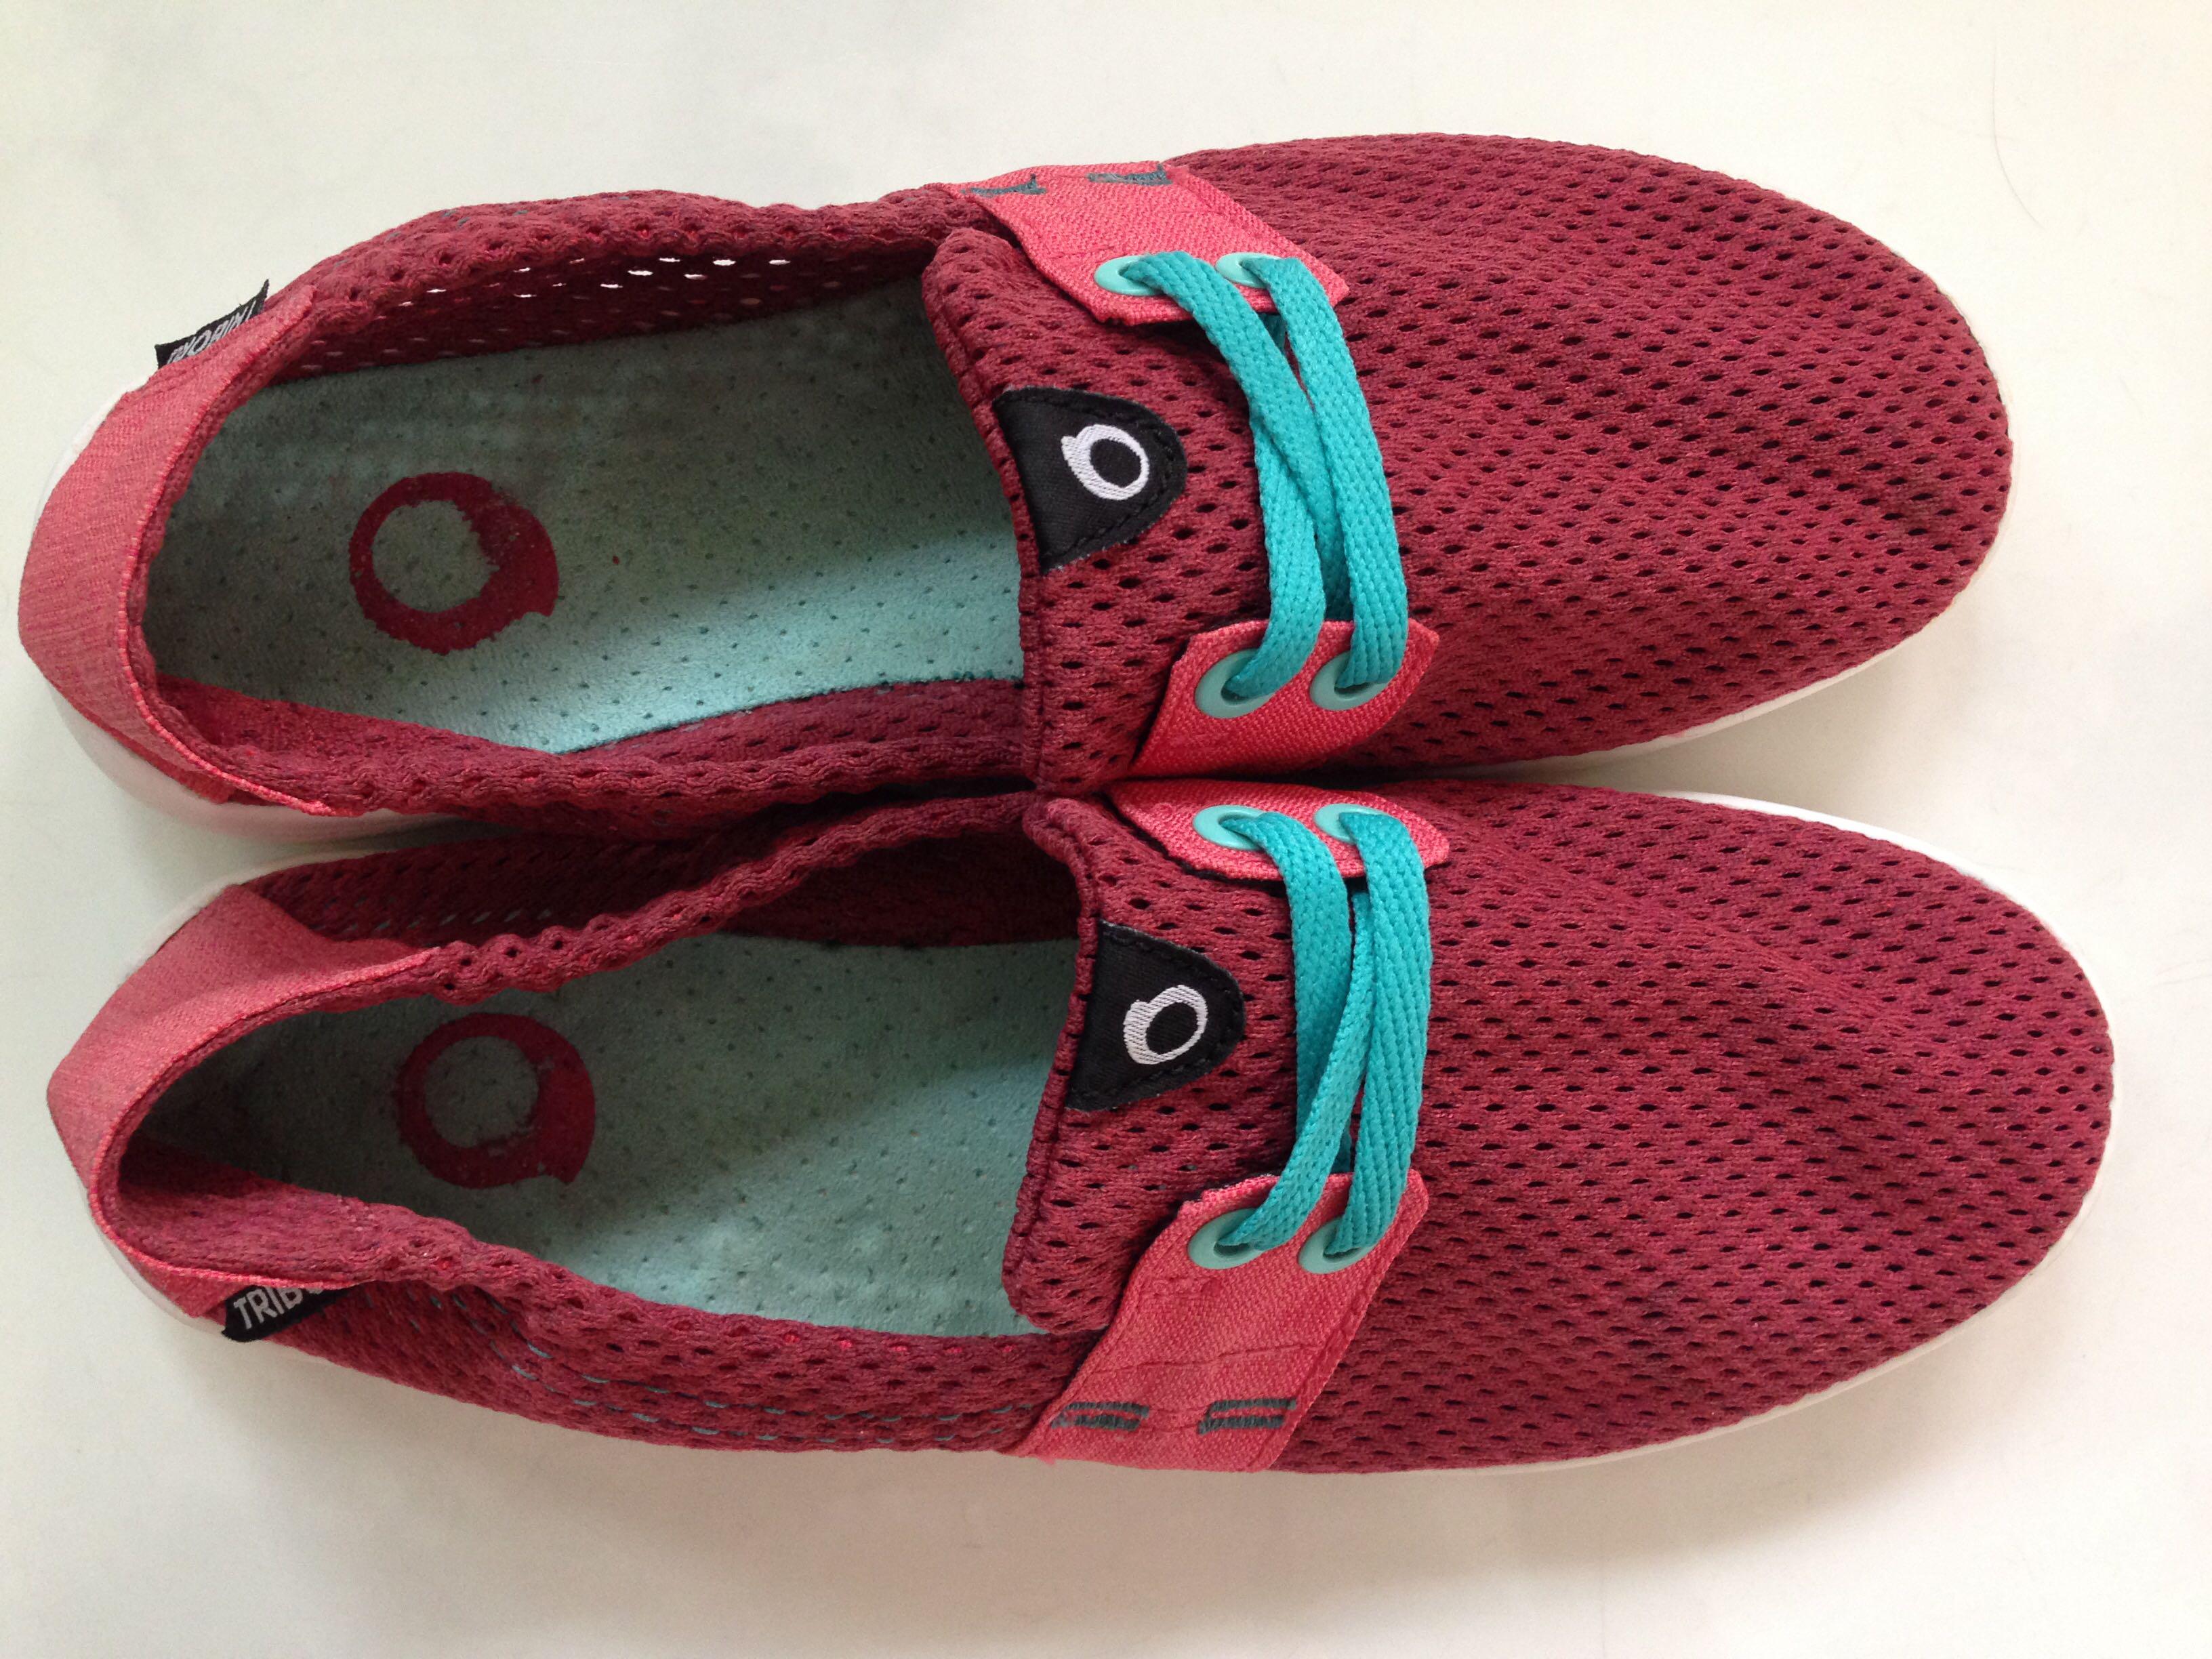 Water Shoes [Coral] - Size 